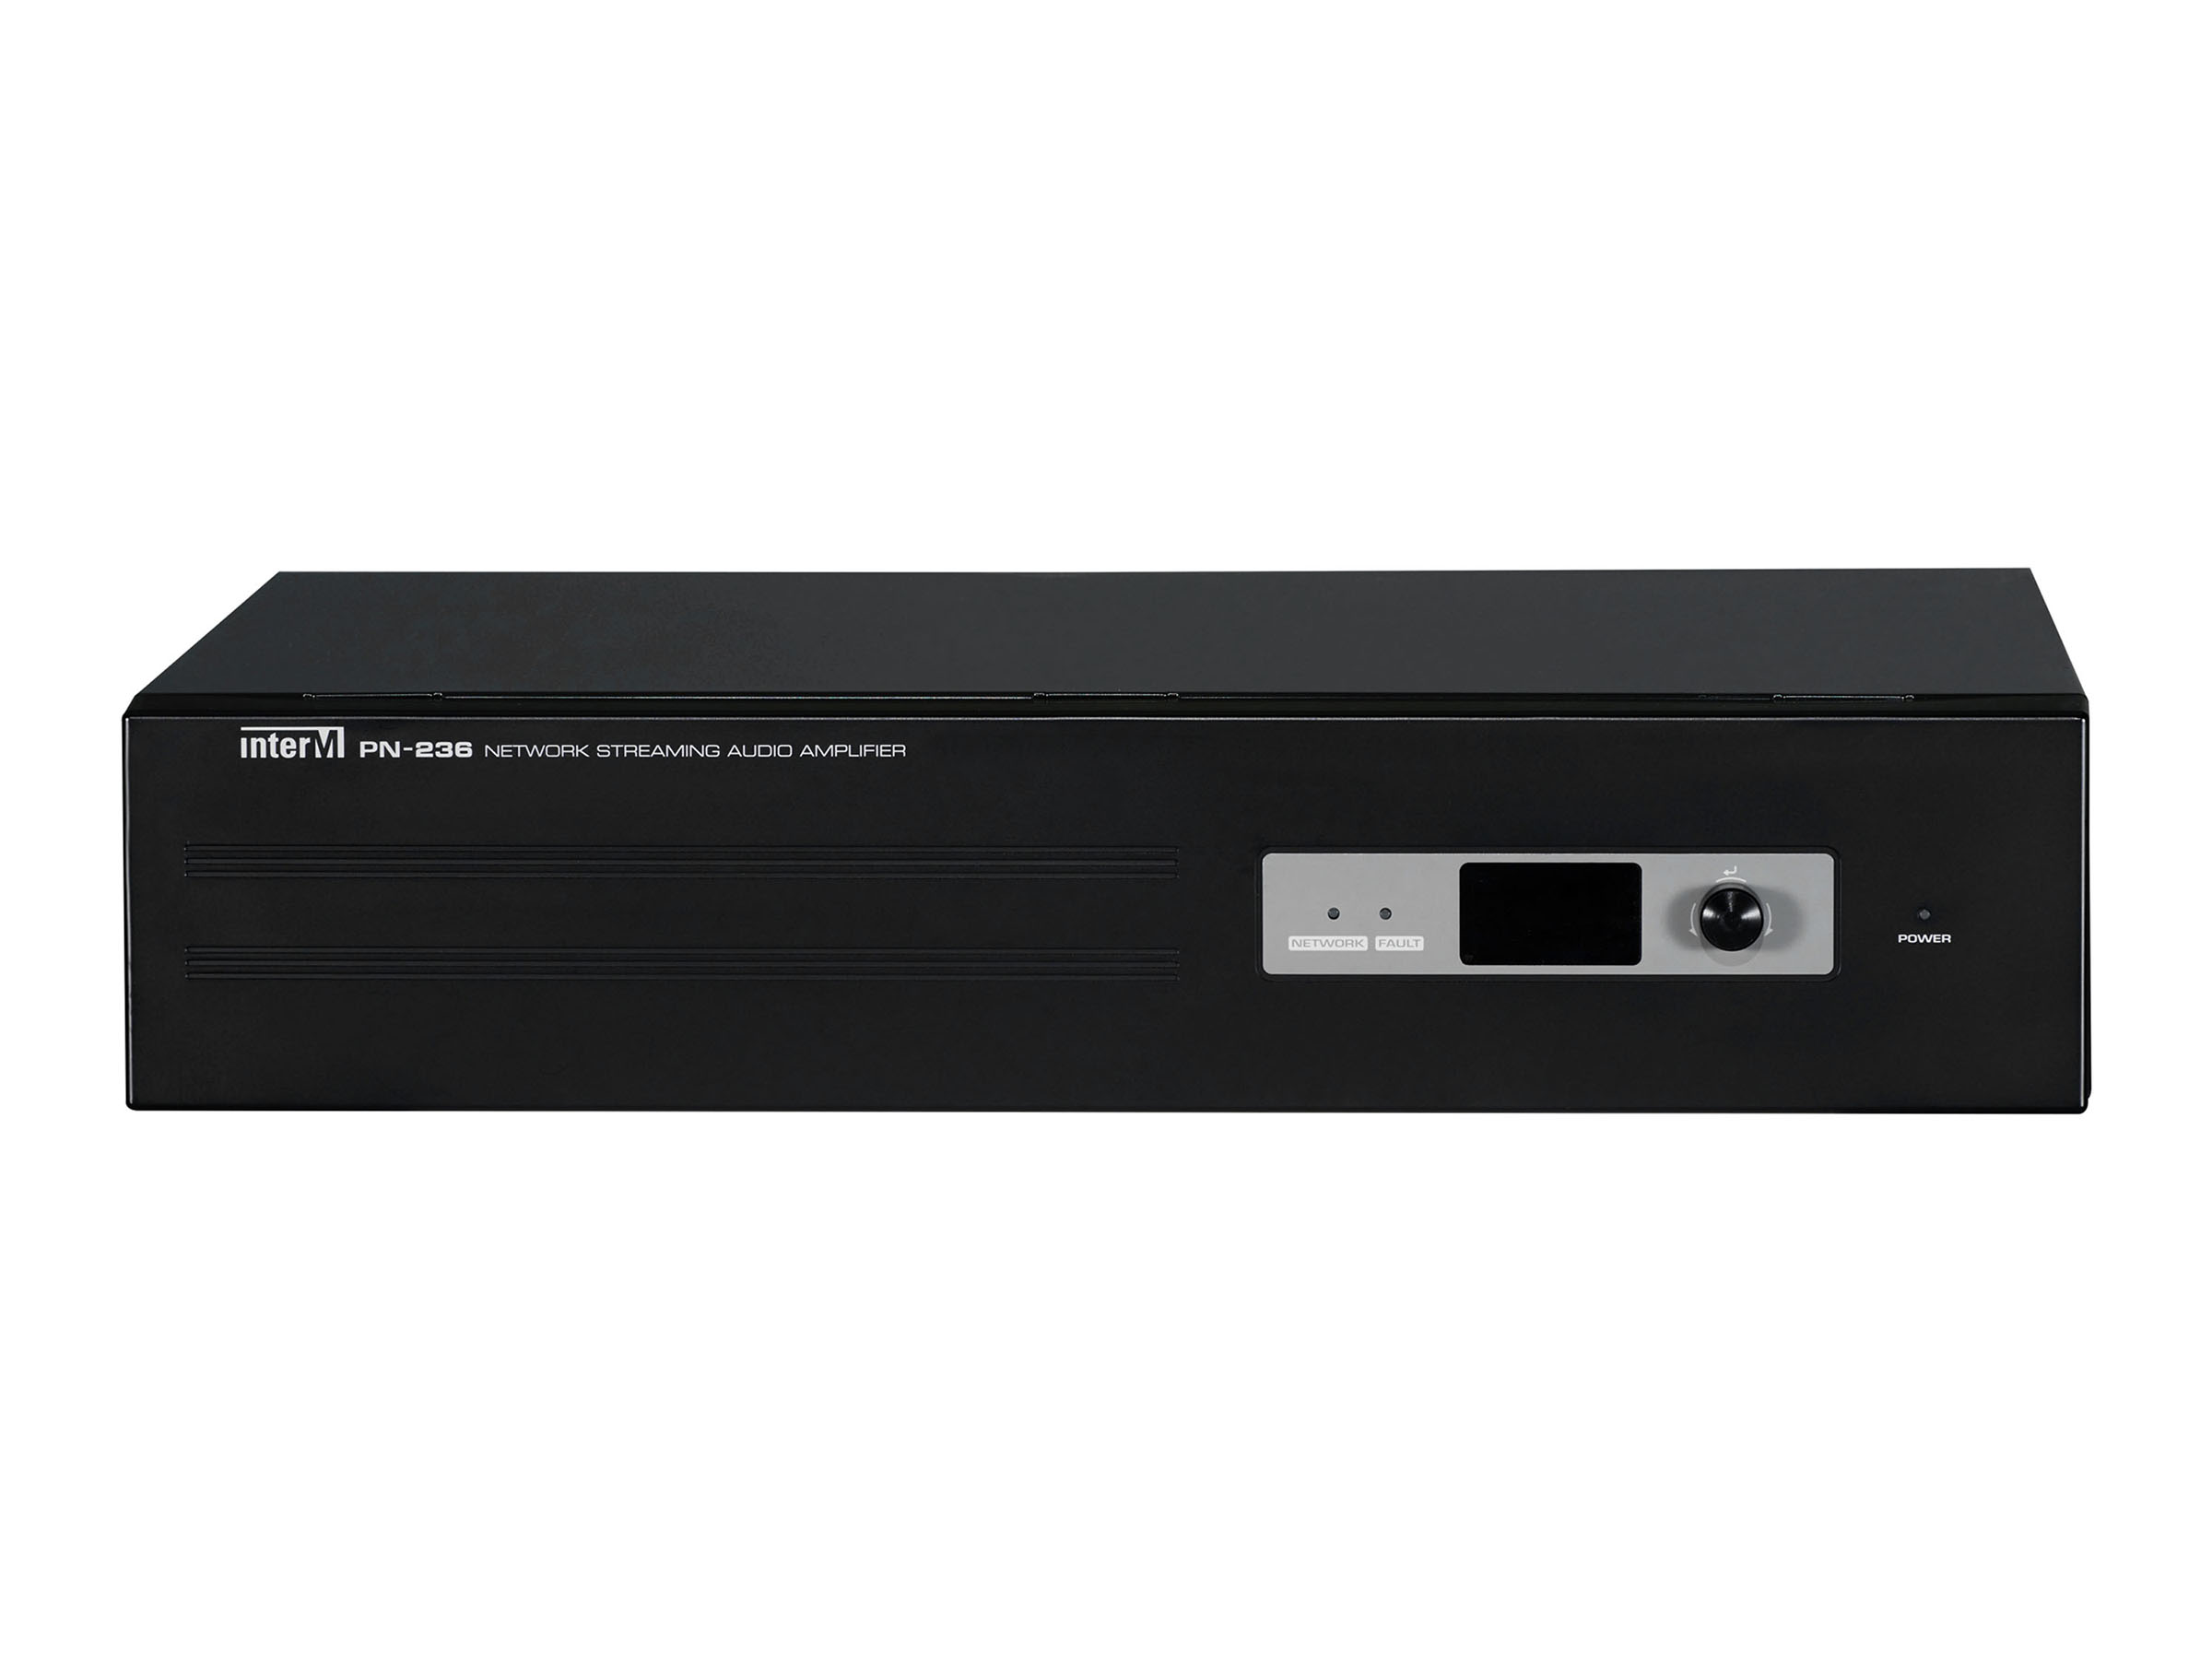 PN-236 360W Network Streaming Audio Mixing Amplifier by Inter-M